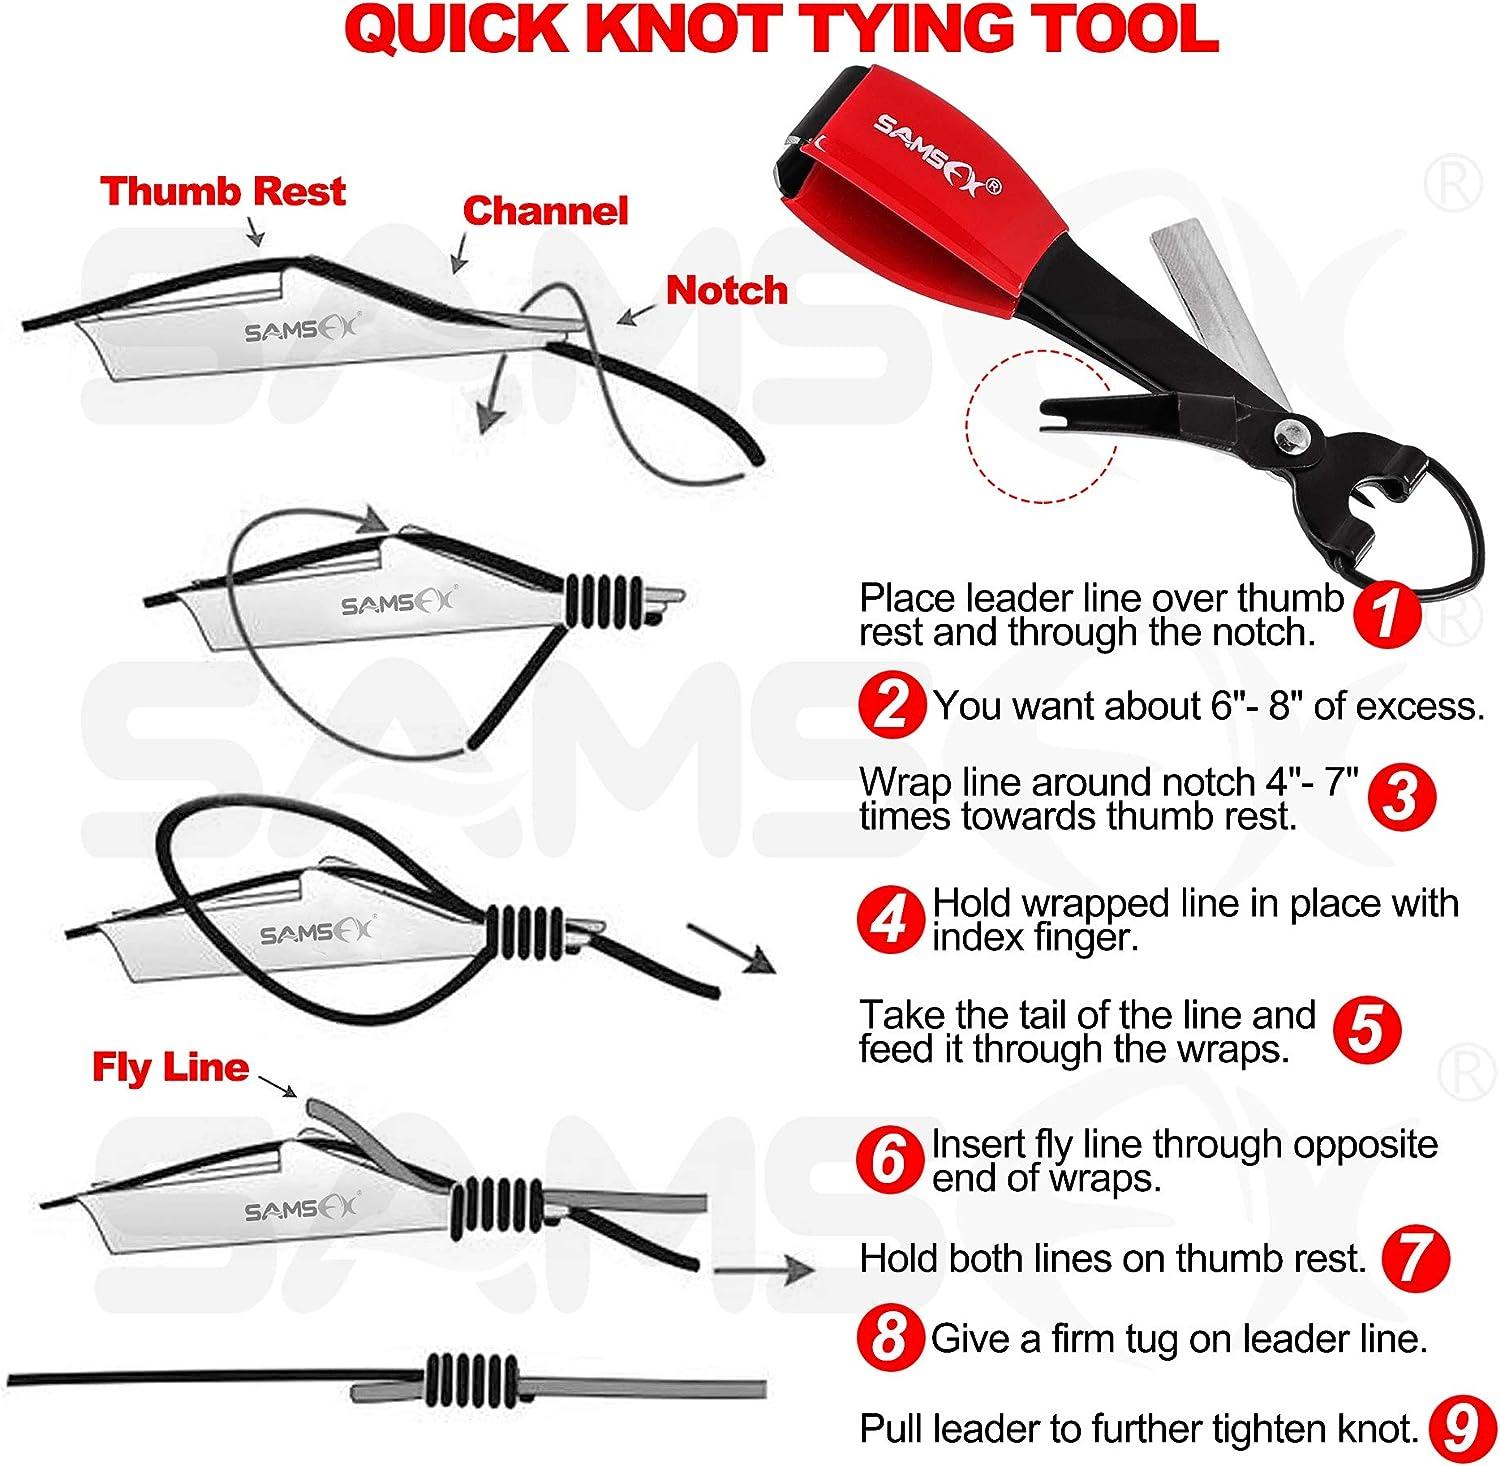 KNOT GRIPPERS // The Original Tool to Tie Knots